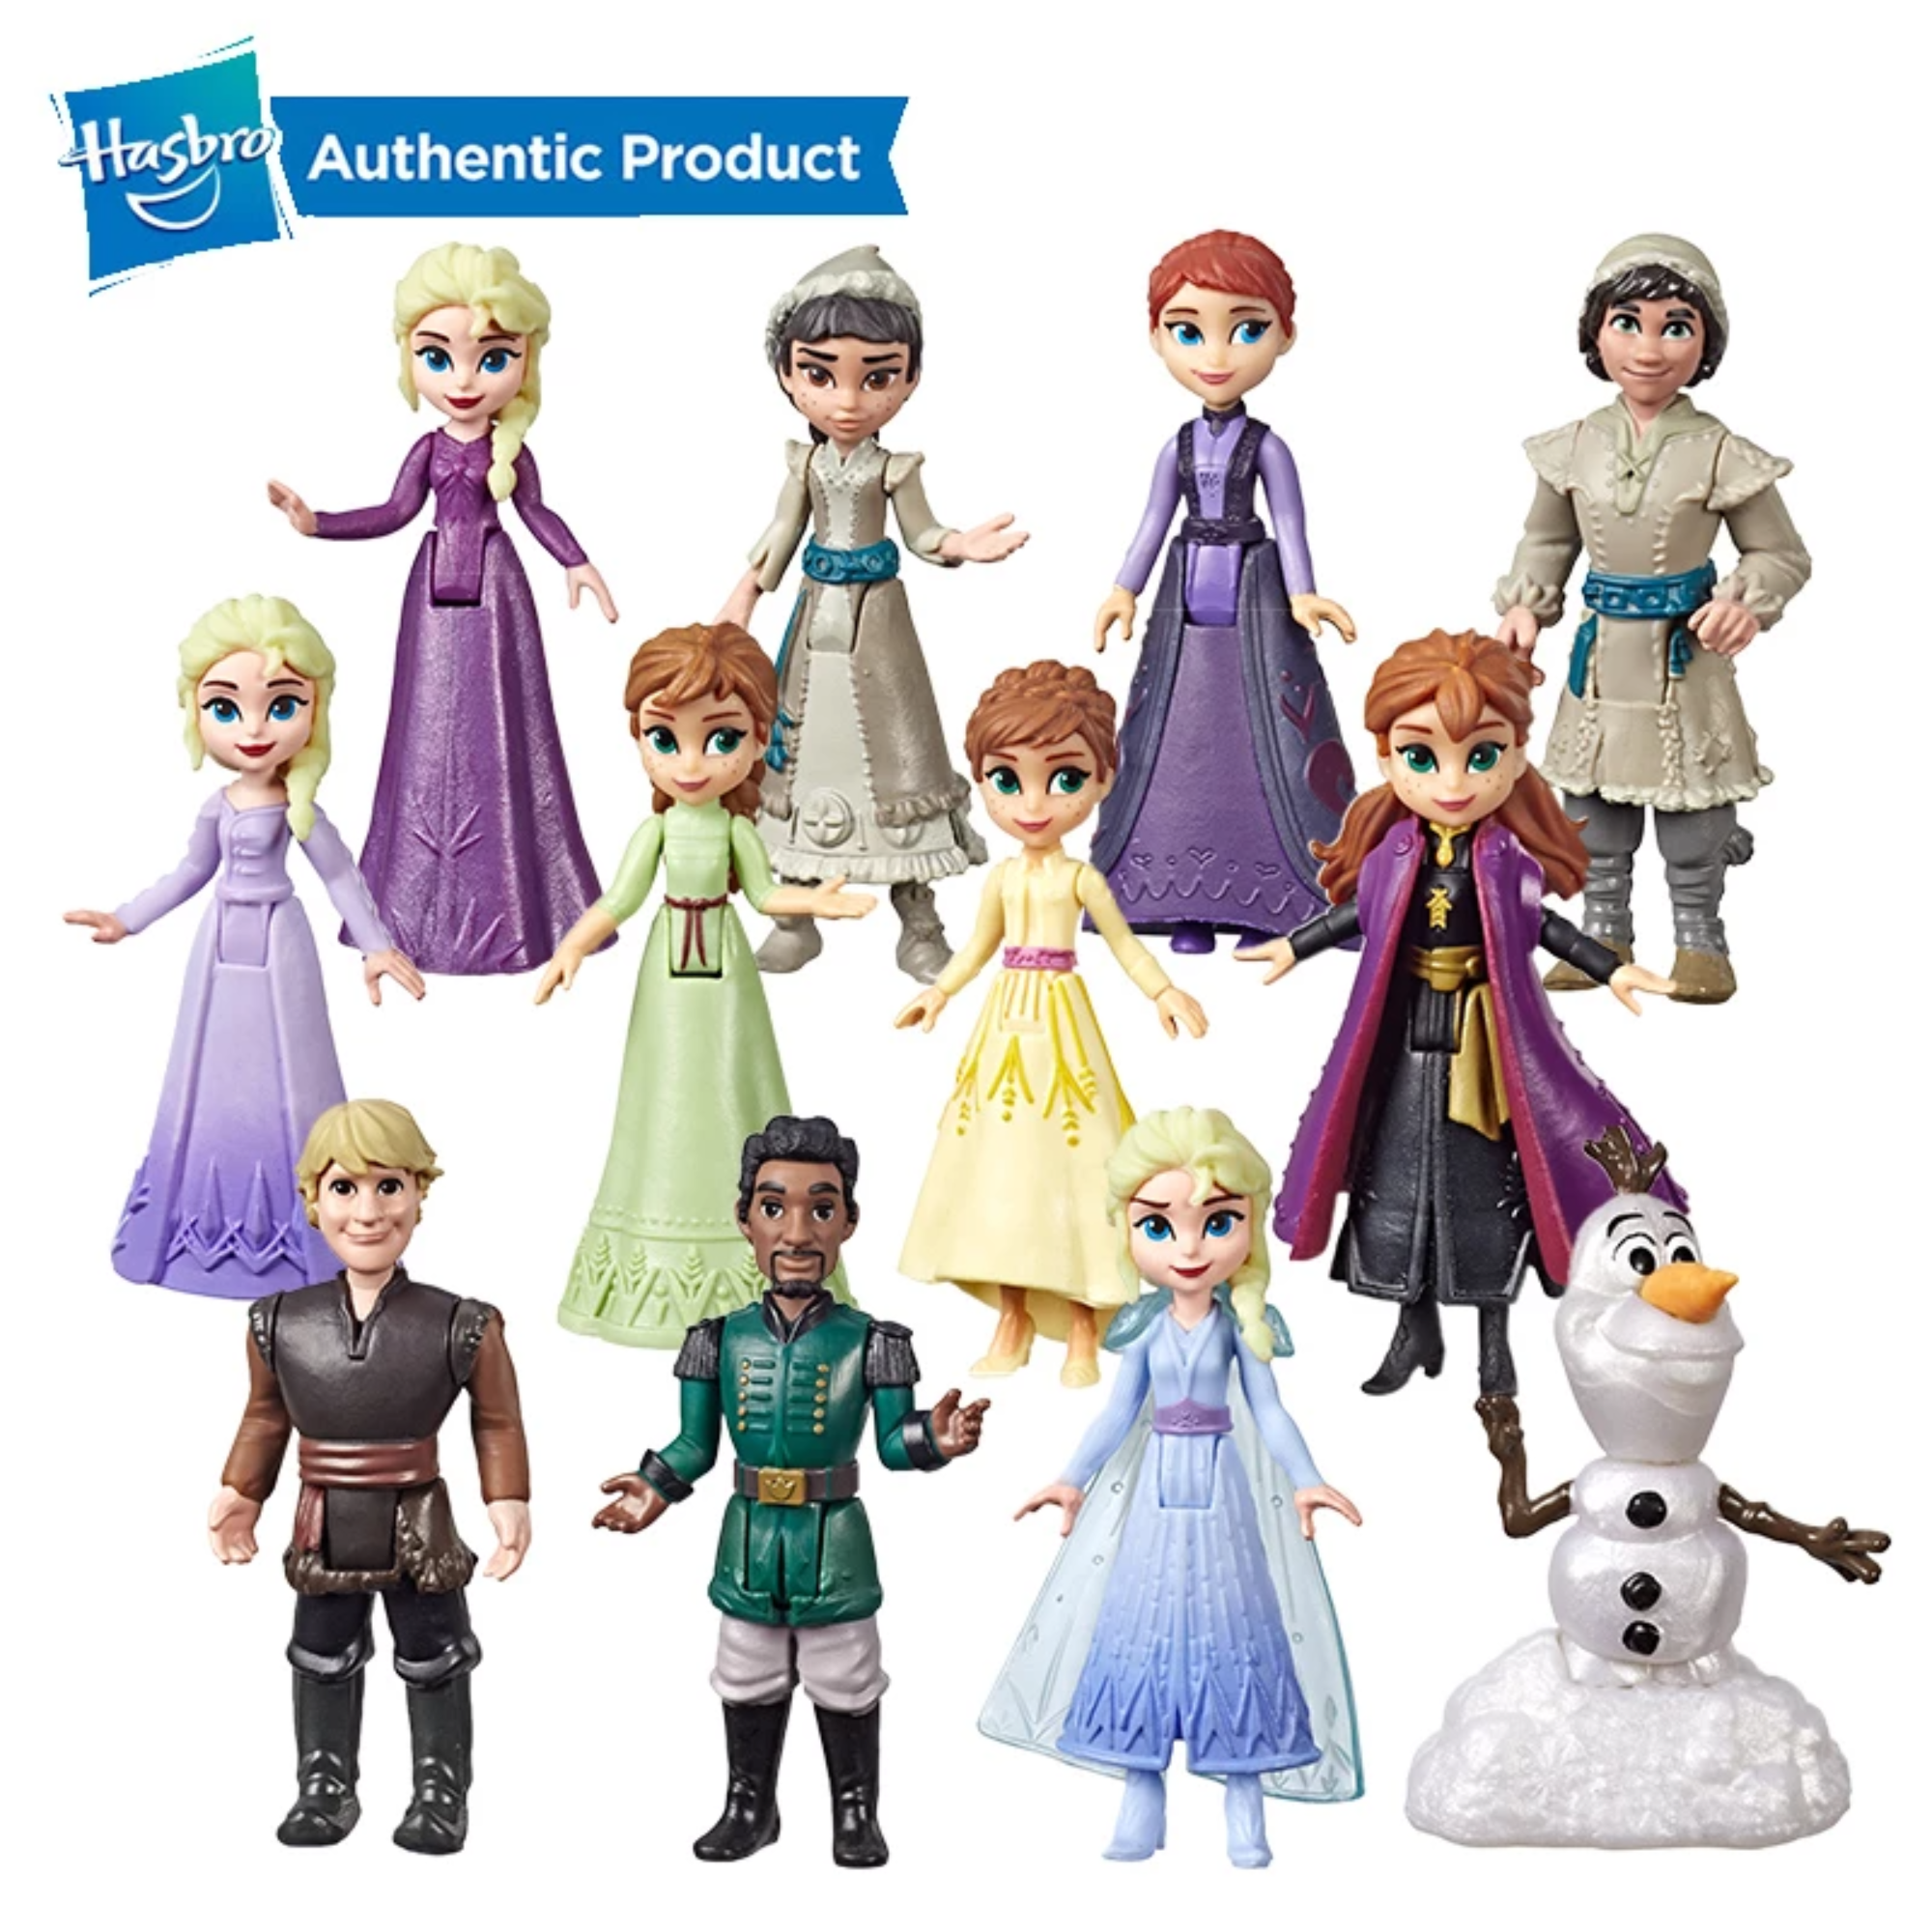 Disney Frozen 2 Pop Adventures Series 2 Surprise Blind Box With Crystal-Shaped Case and Favourite Frozen Characters - 4 Pack - Toptoys2u